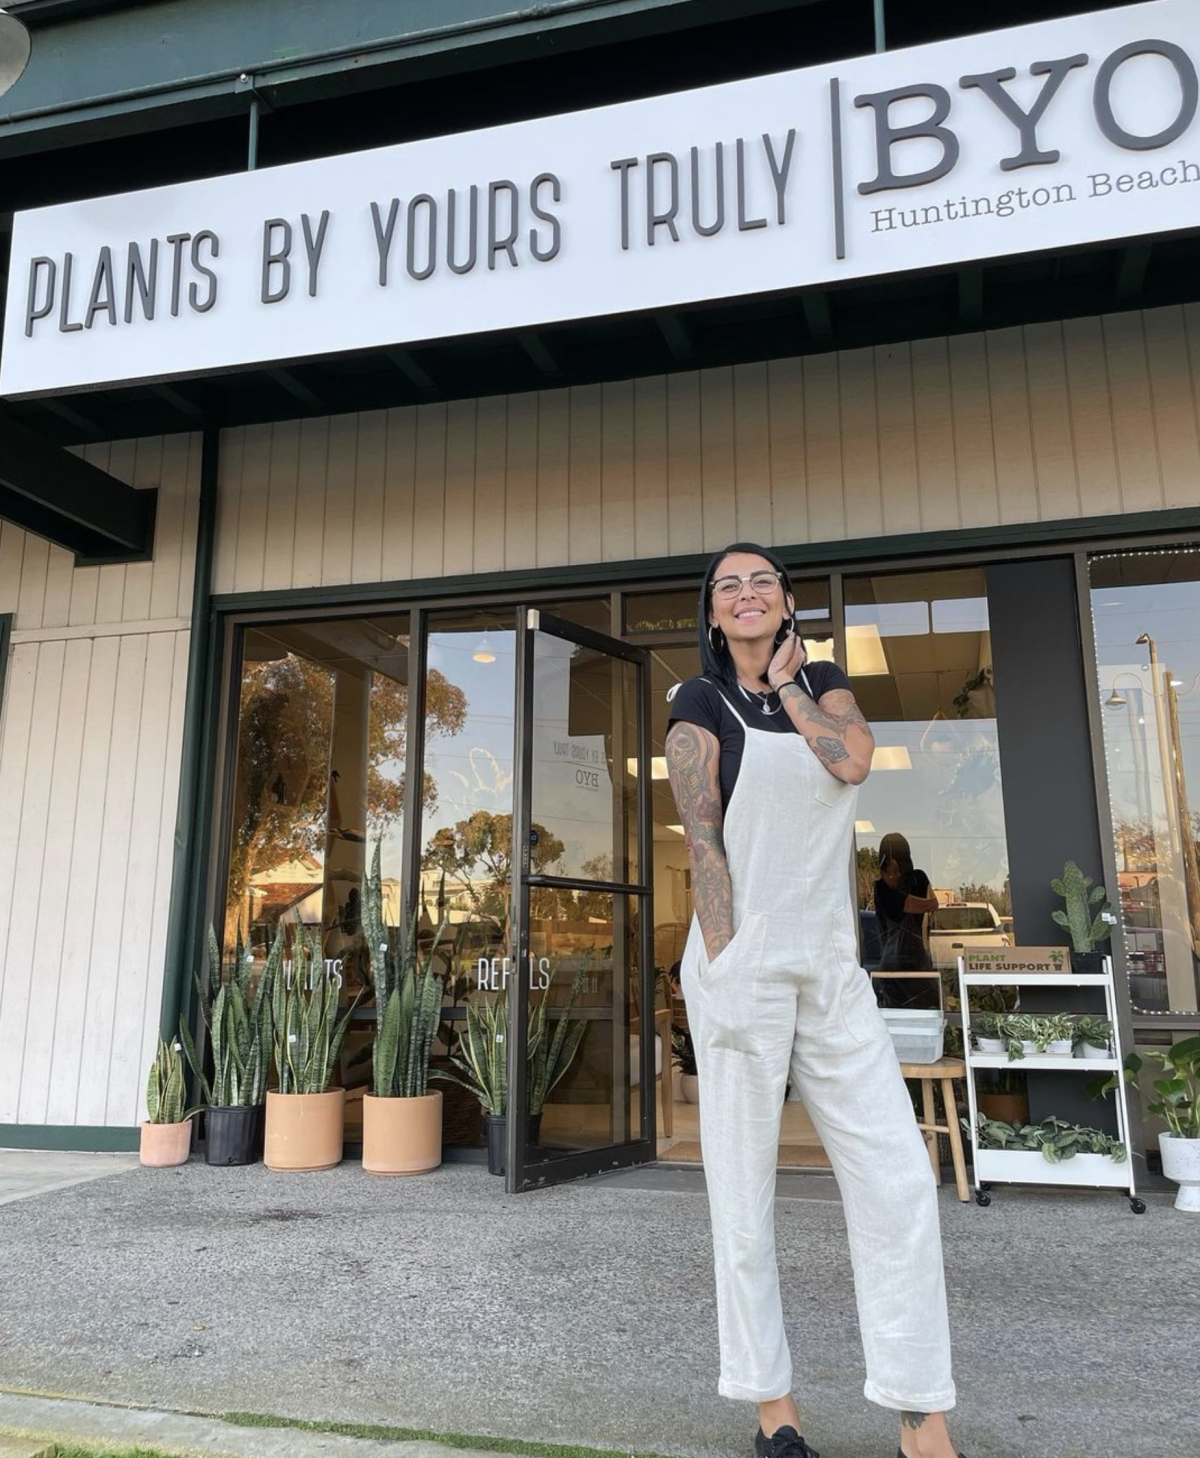 Plants By Yours Truly. Image of Owner out in front of her shop